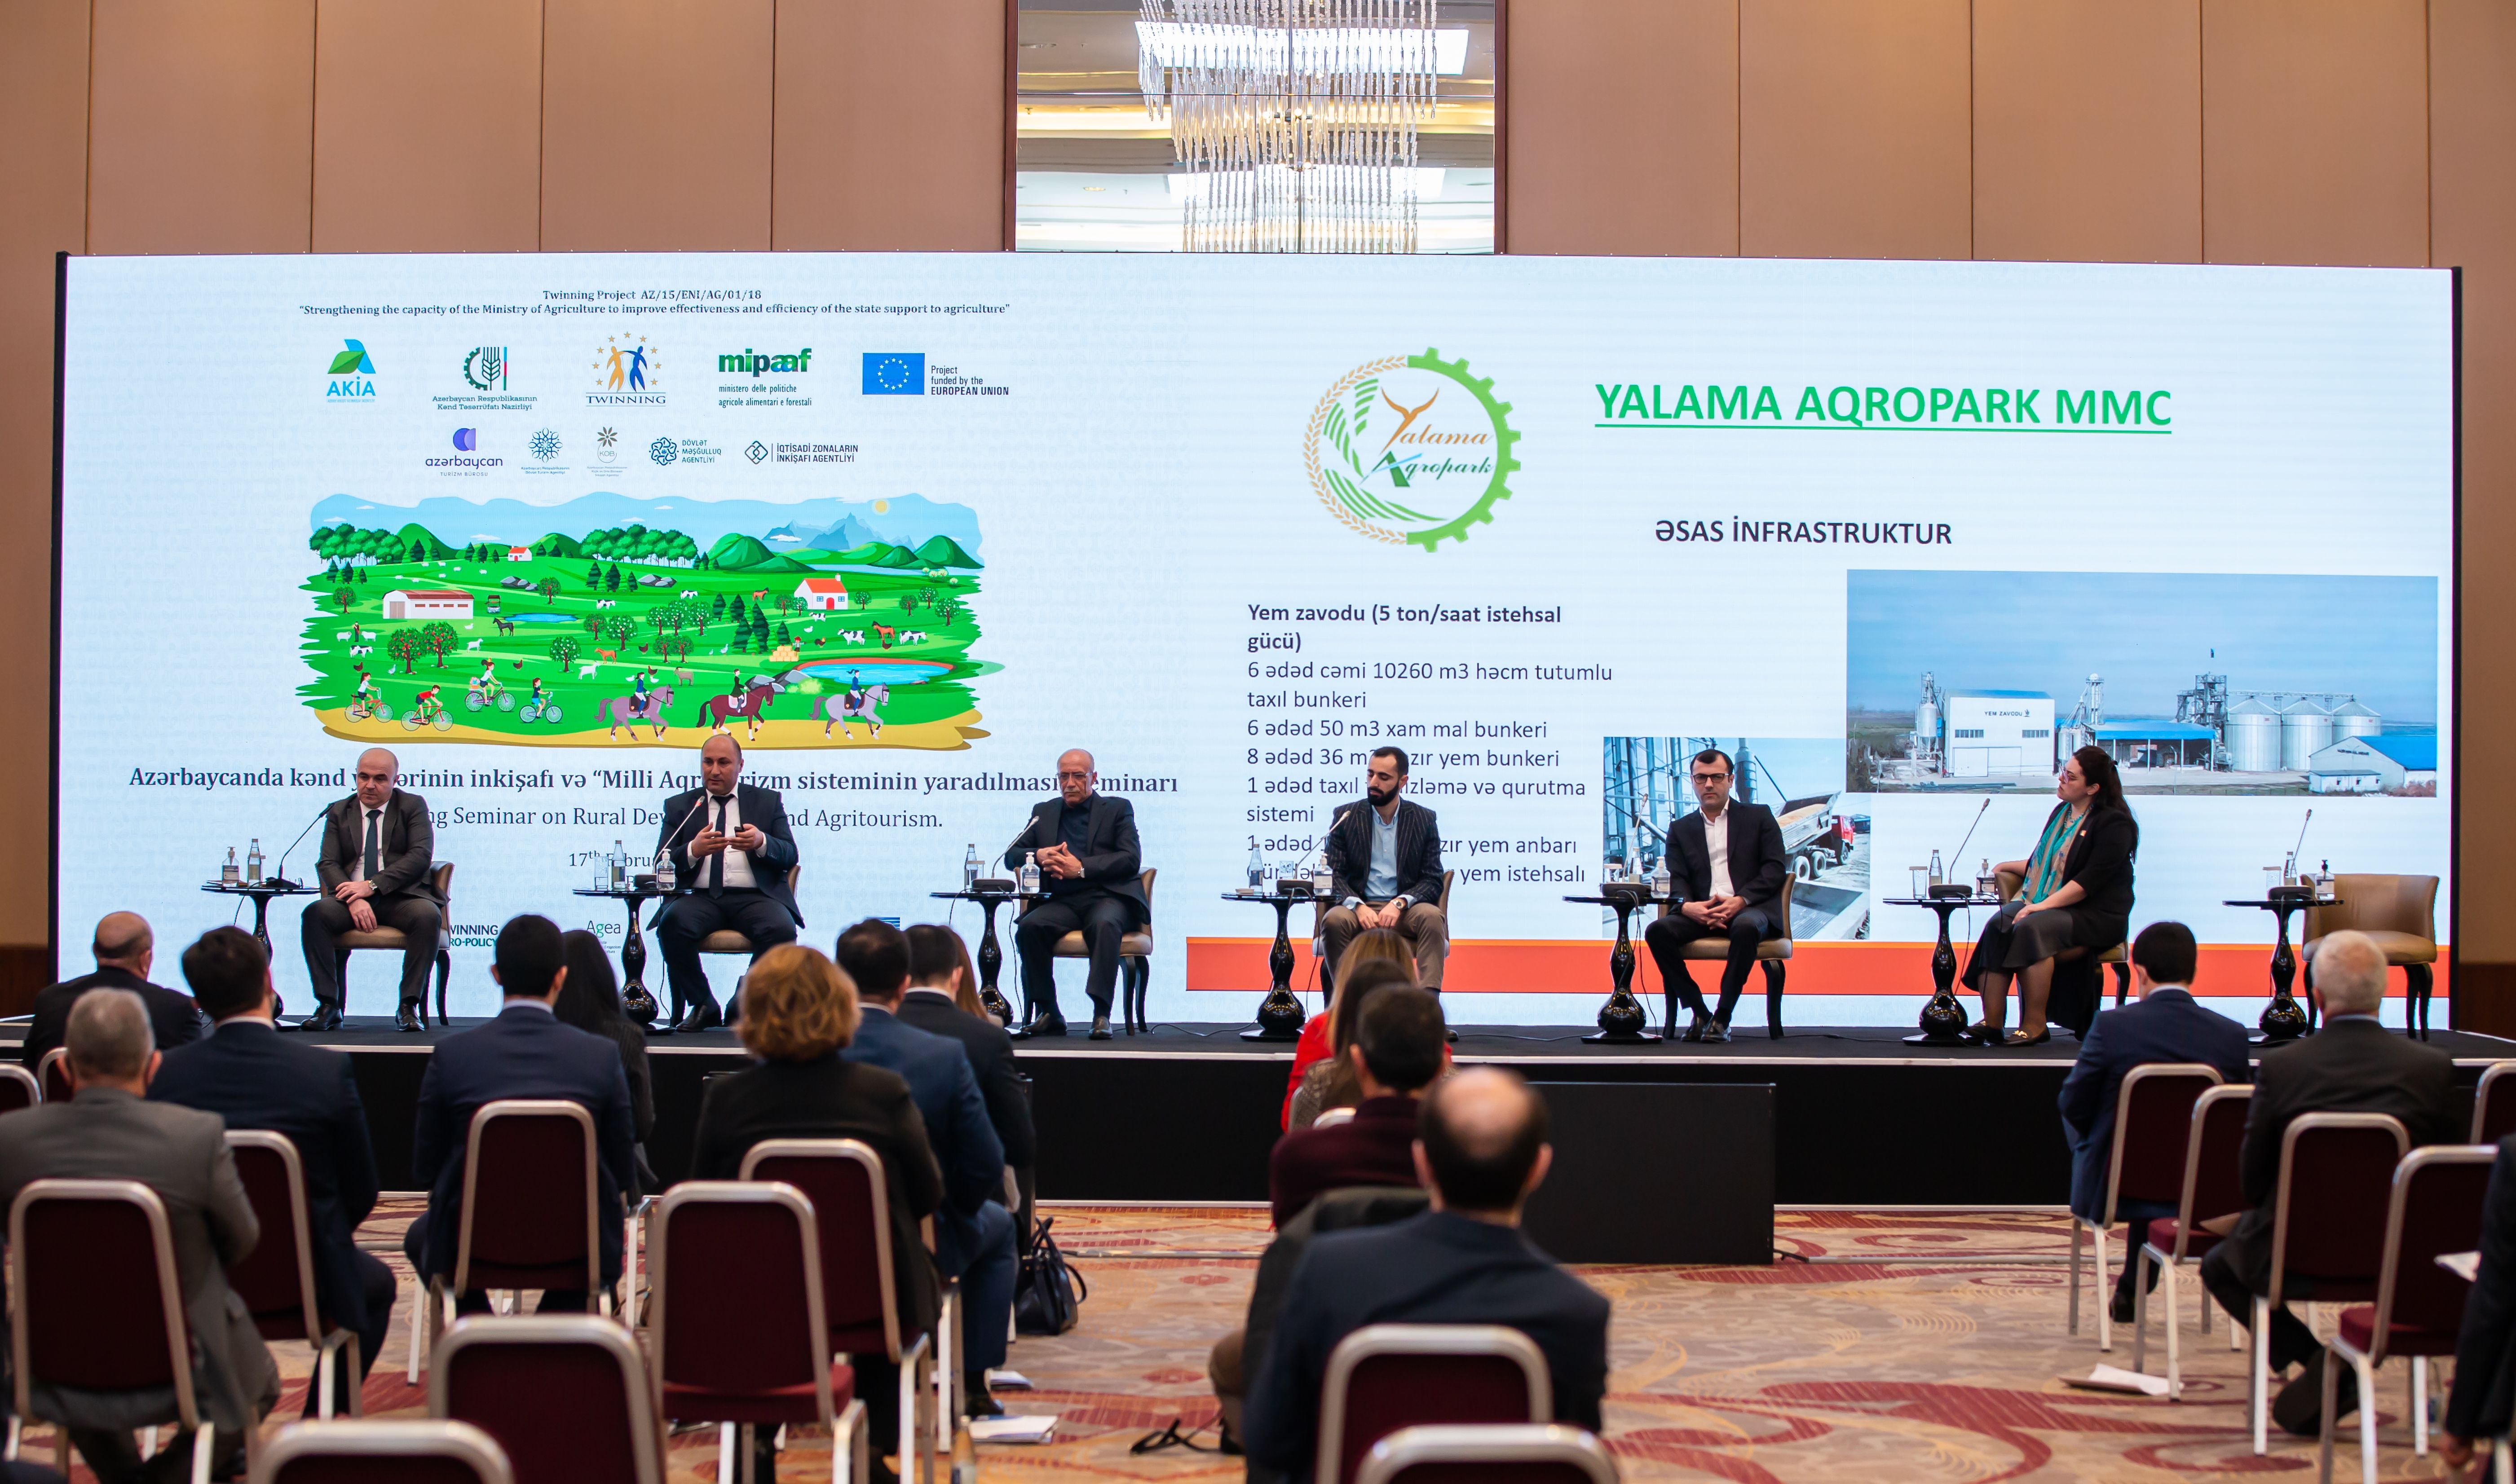 Twinning Seminar on “Introducing a Rural Development framework and setting-up a national Agritourism system in Azerbaijan”, Baku, 17th February 2022. 